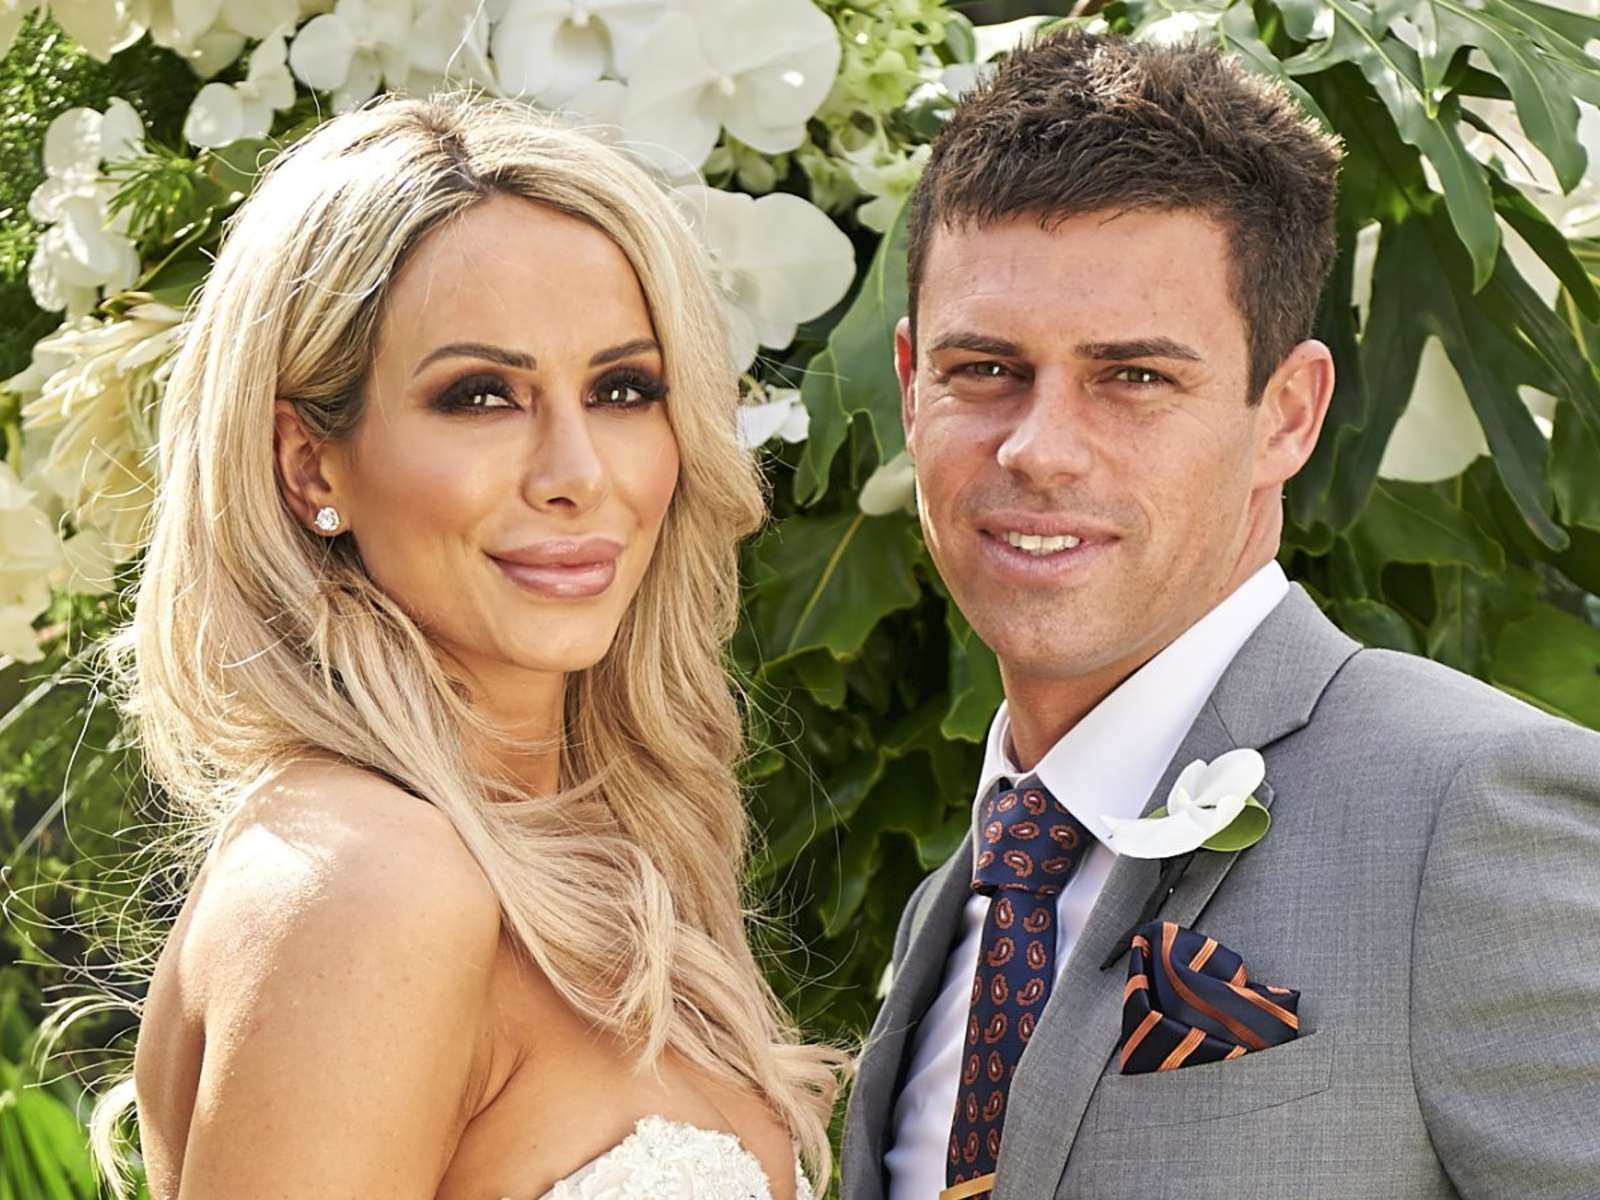 Married at First Sight Australia Season 7 to air on Lifetime beginning in